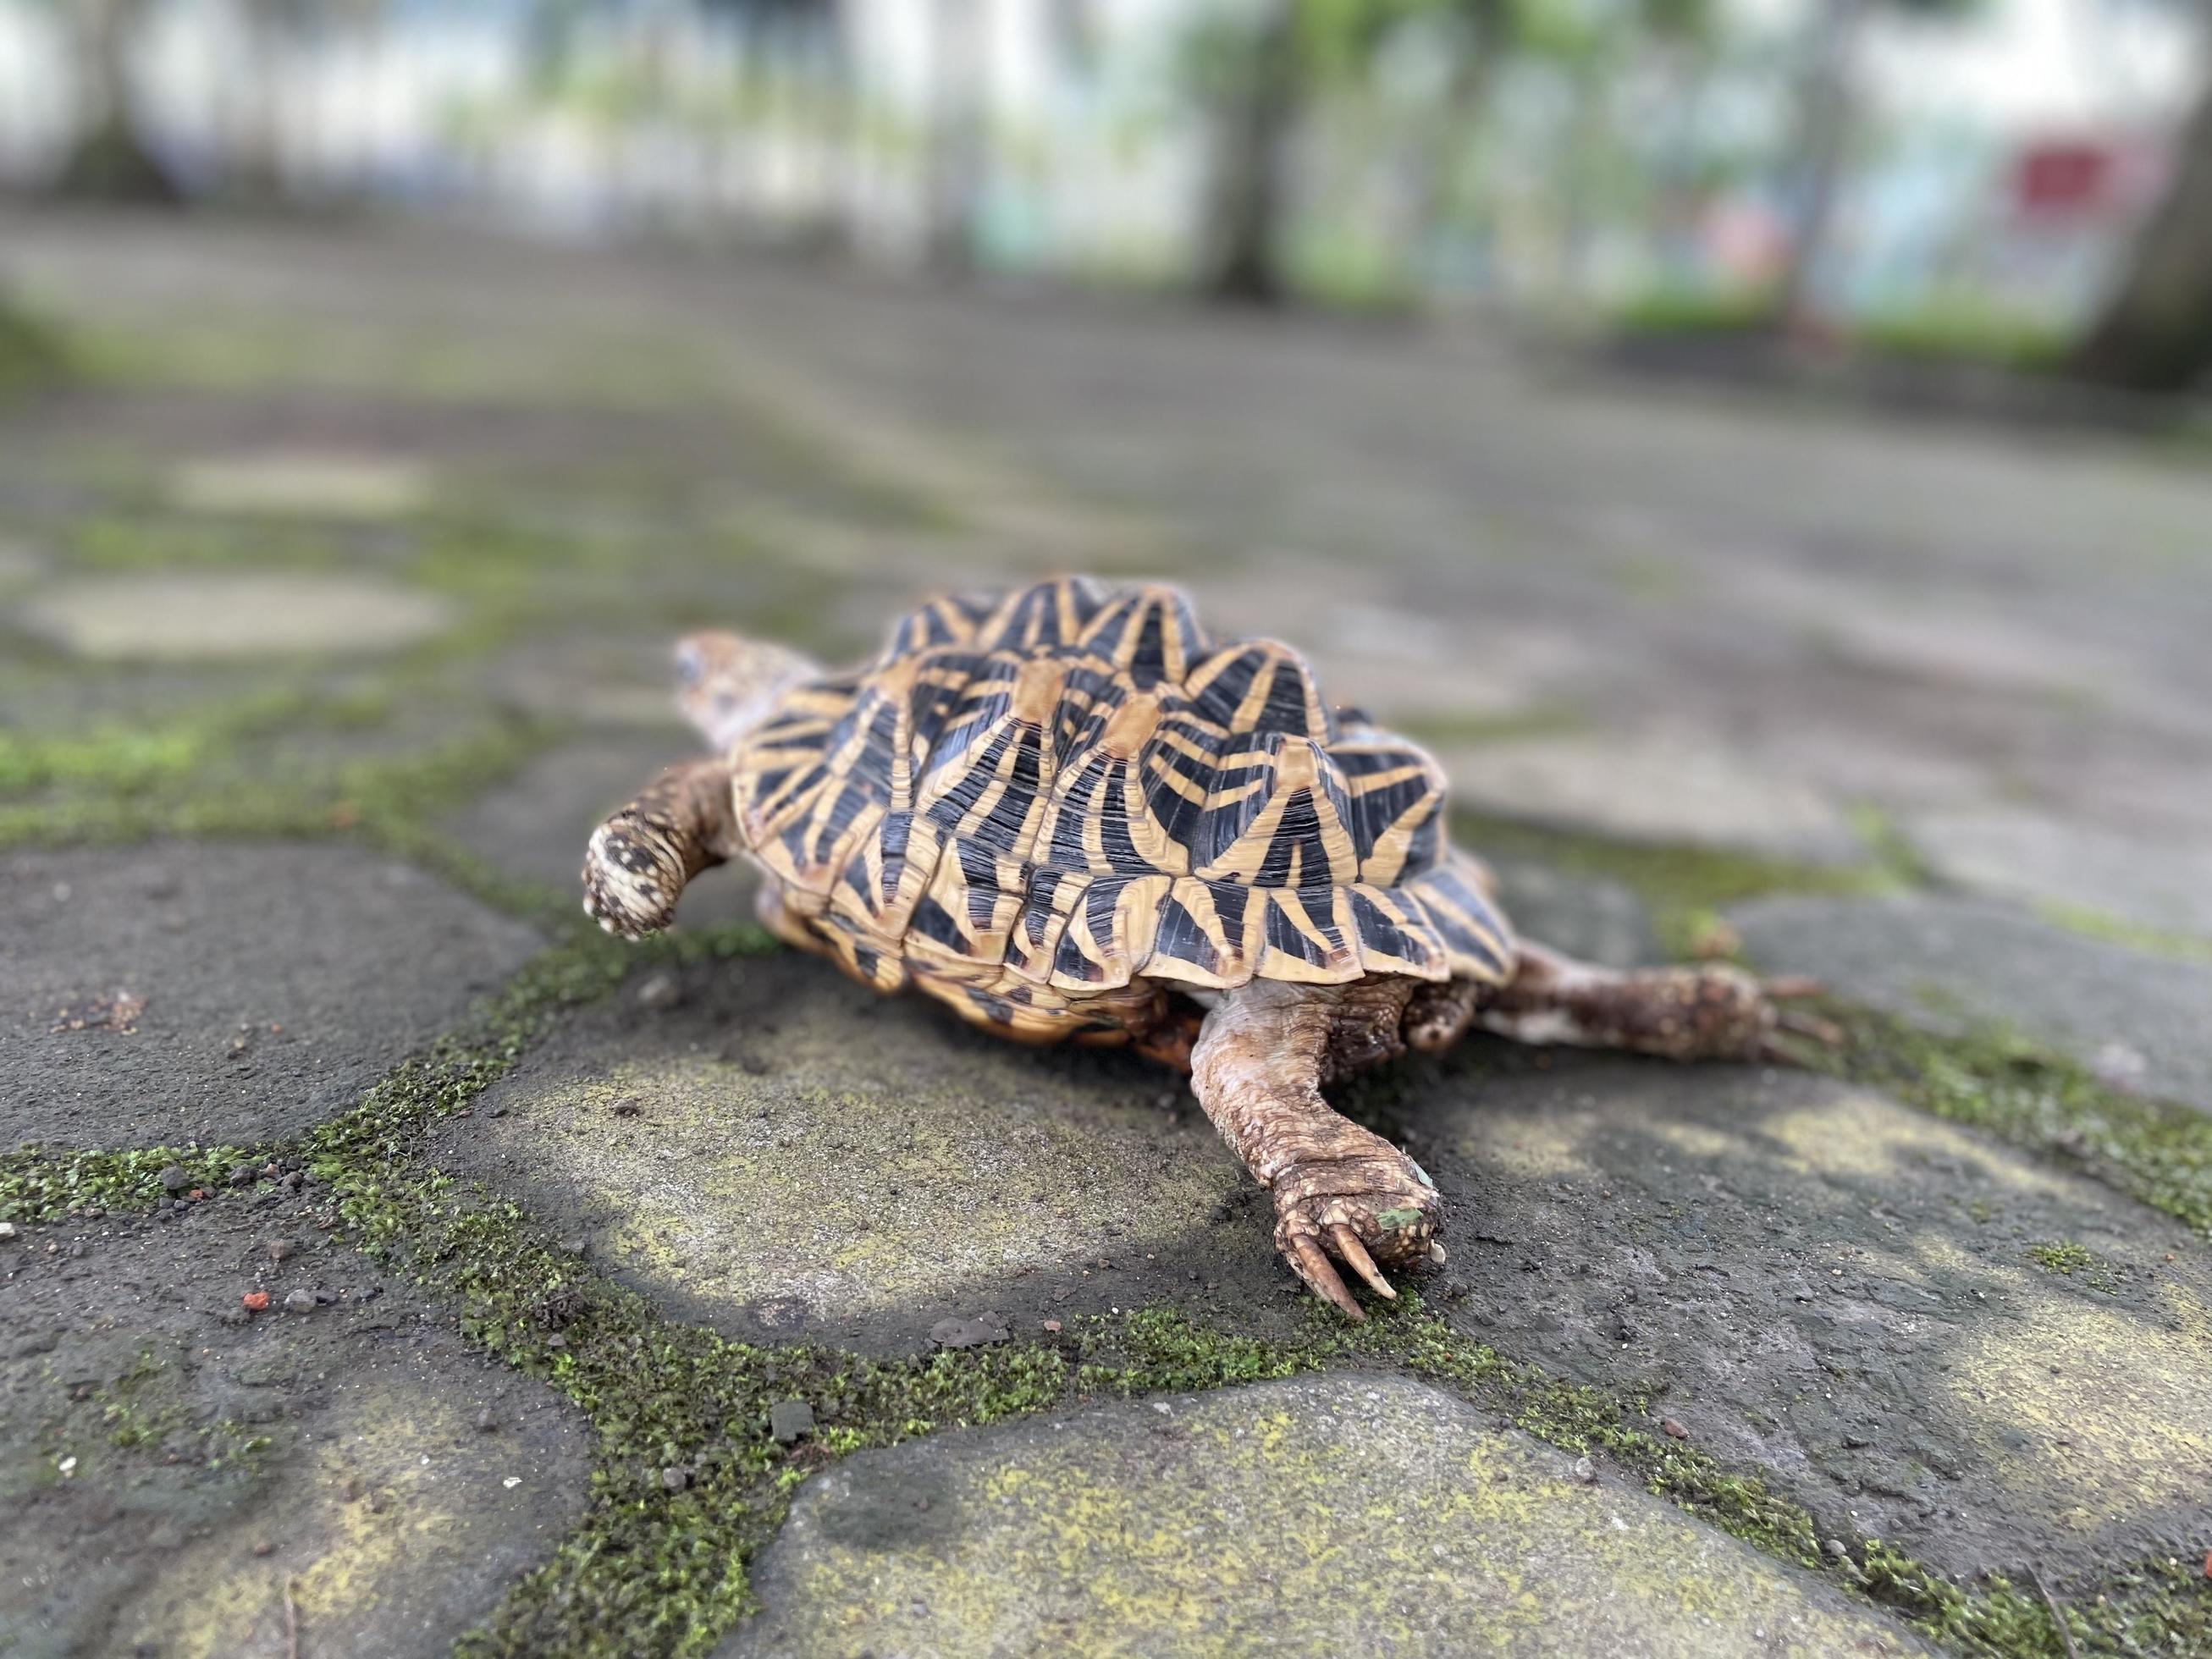 Indian star are very rare reptiles, these animals are also classified as  ancient animals because they can be hundreds of years old. The tortoise,  which can only live on land, can't live